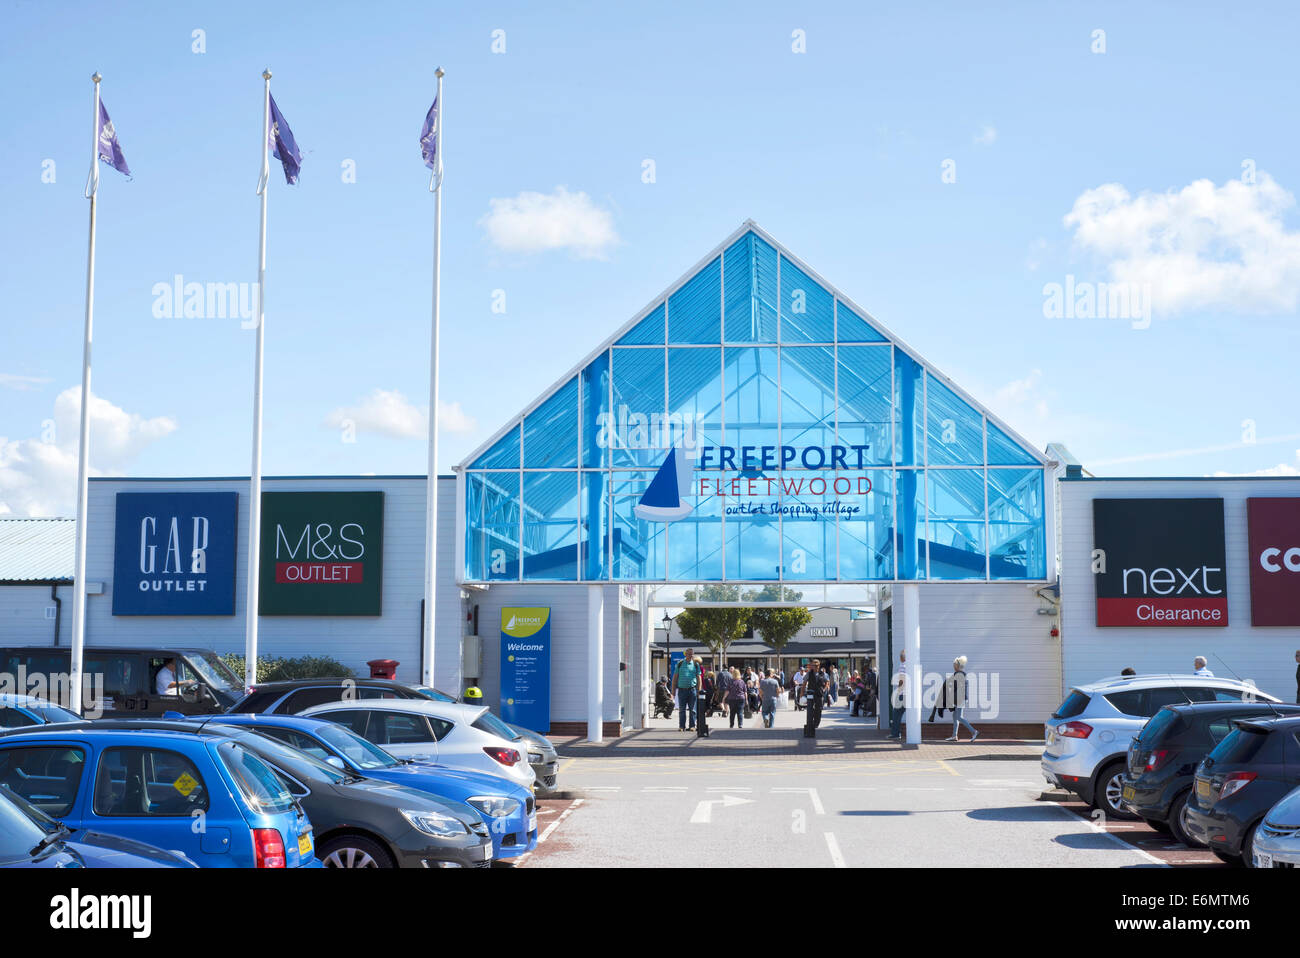 L'ingresso a fleetwood freeport outlet shopping center di Fleetwood, nel Lancashire, Inghilterra Foto Stock